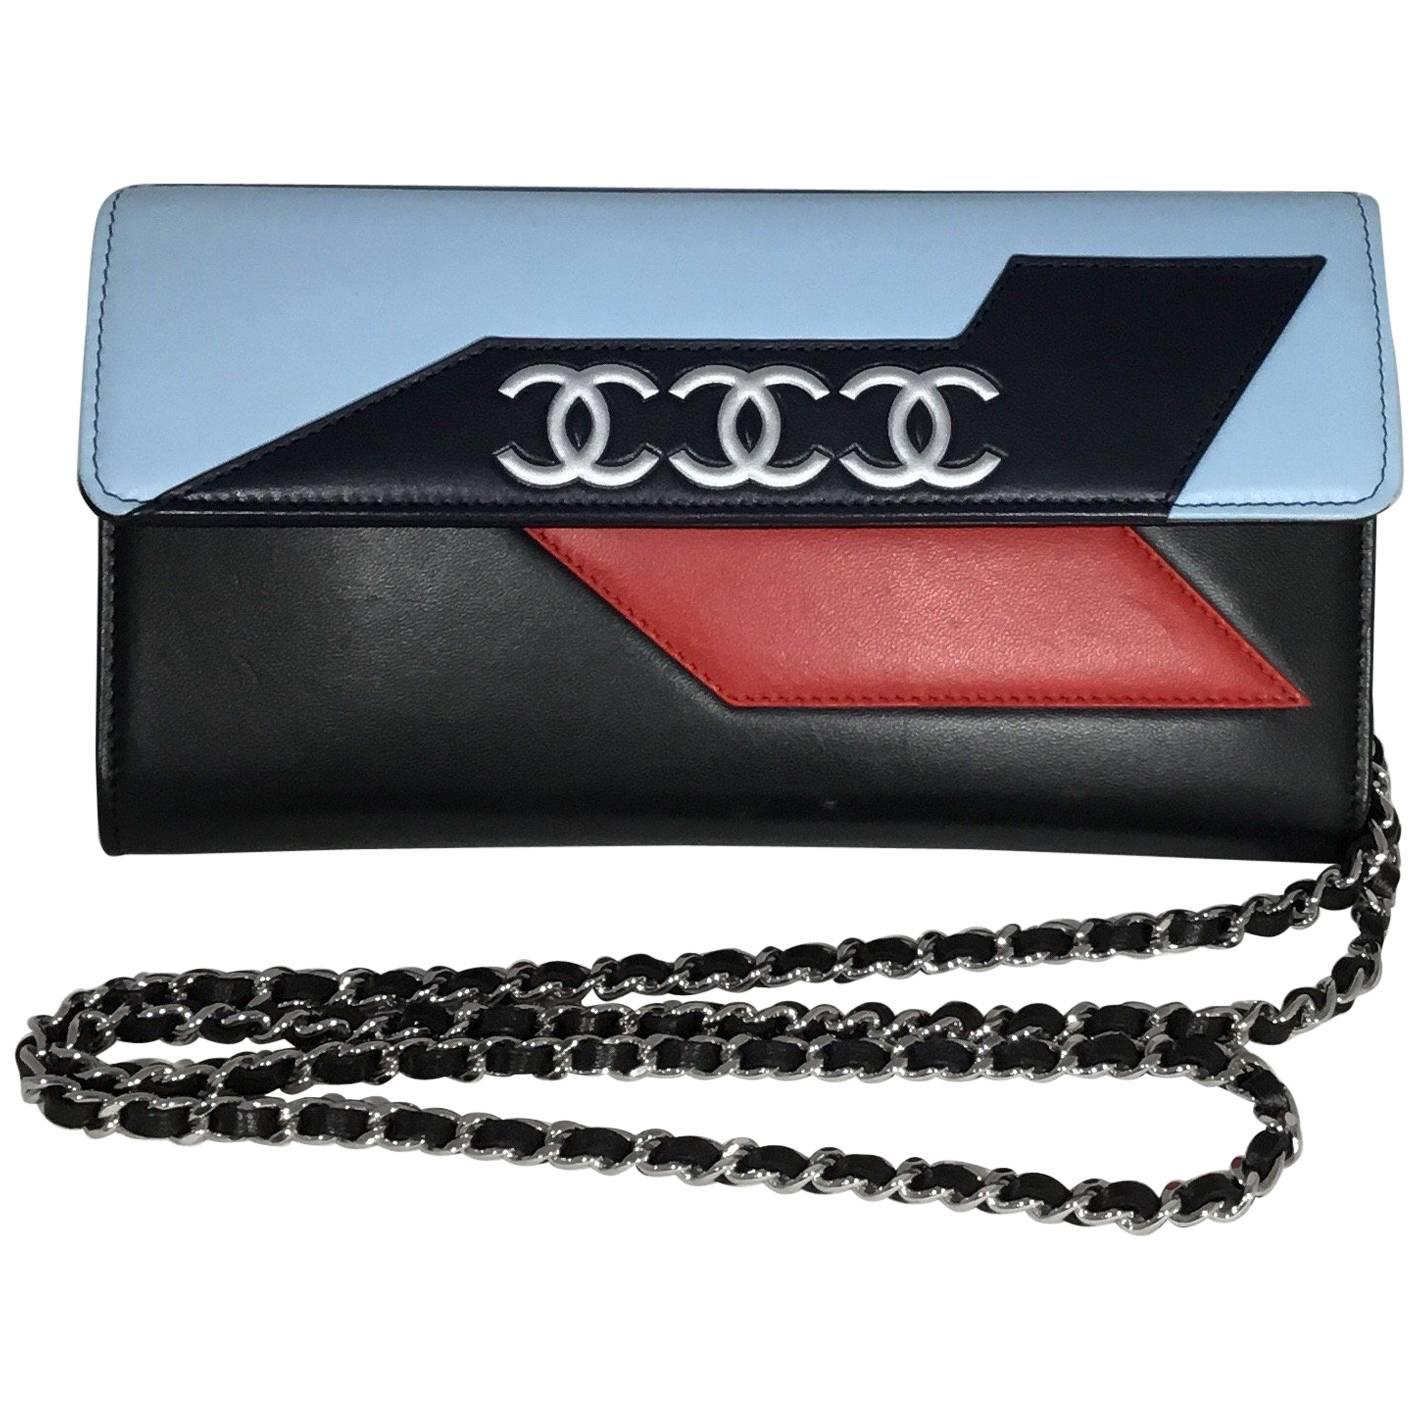 Chanel Airline Lambskin Wallet on a Chain Bag, Spring 2016 